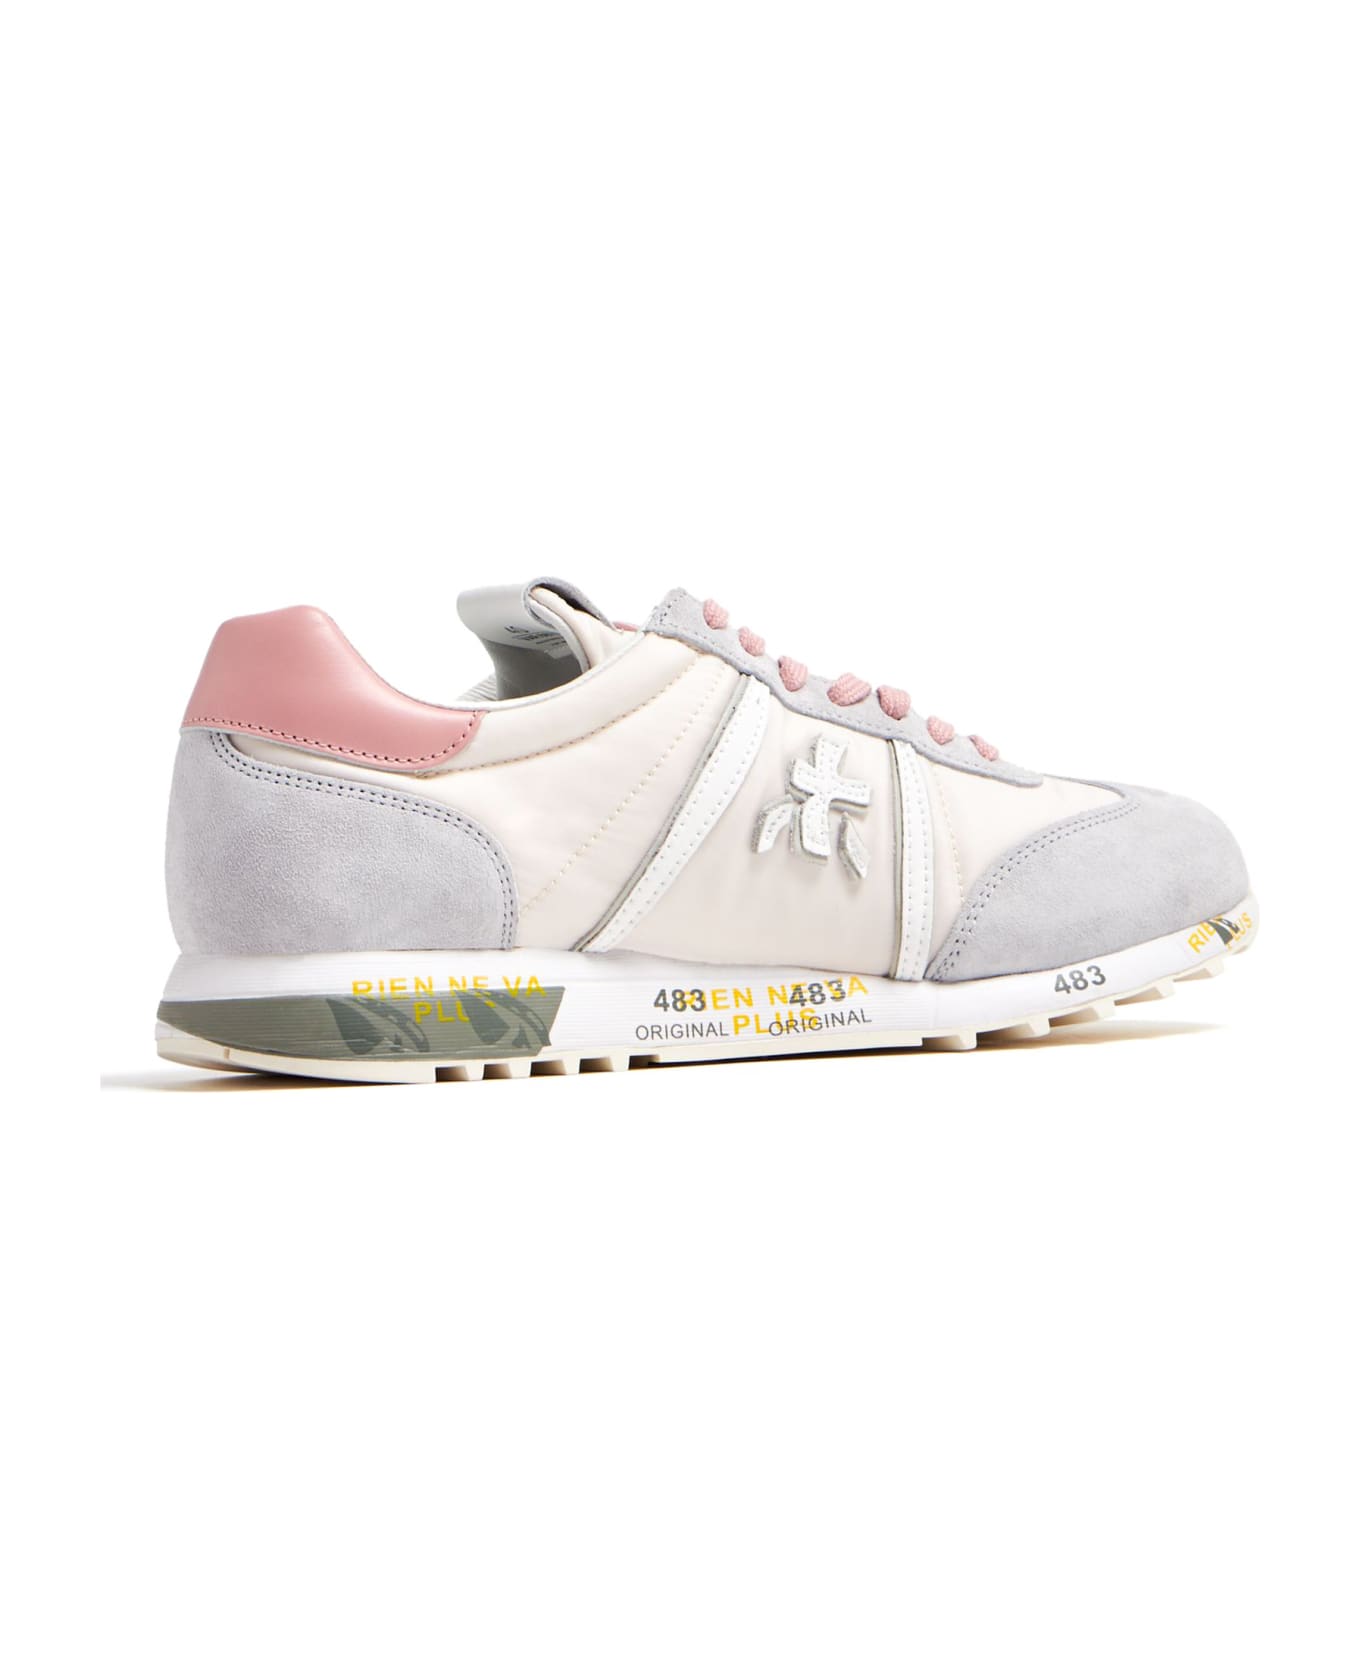 Premiata Lucy Sneakers - Pink スニーカー